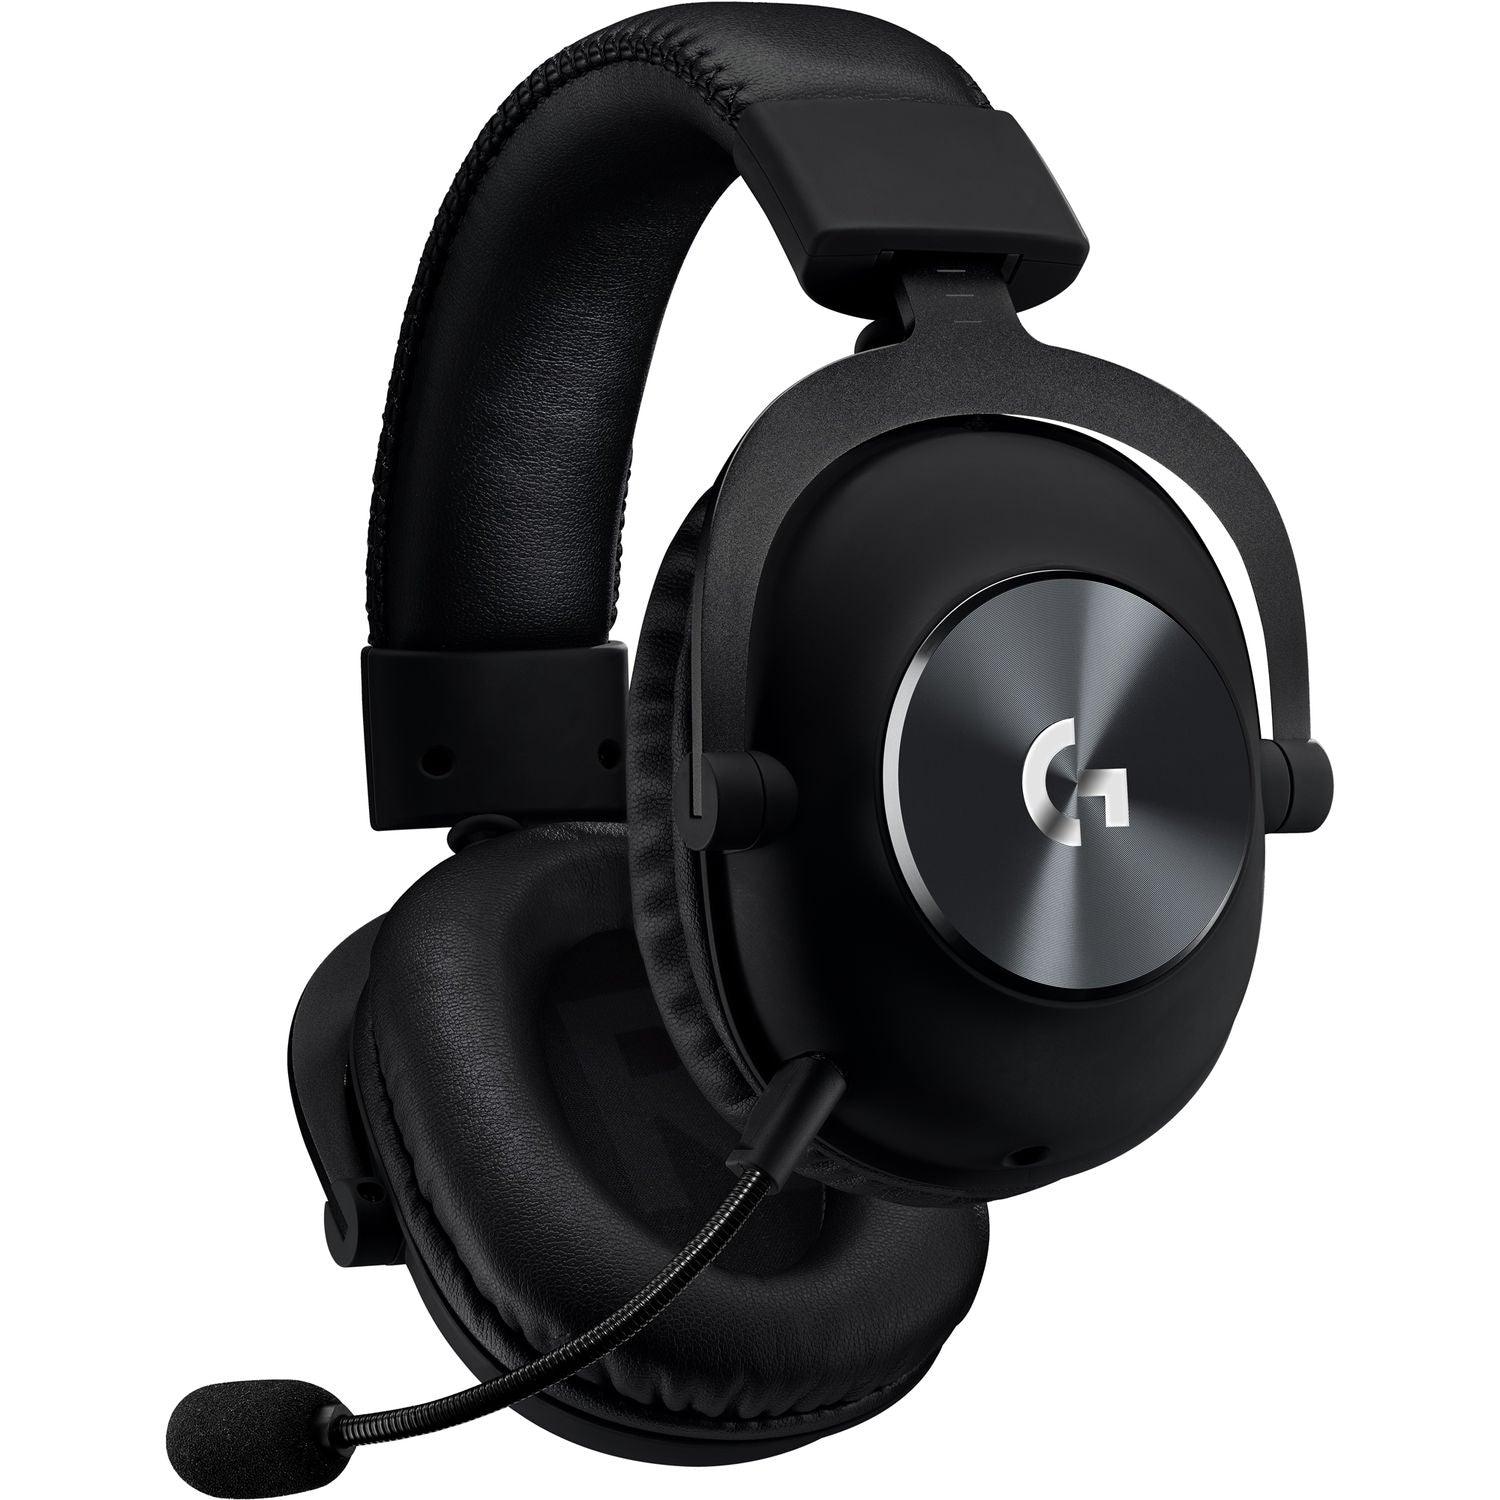 Logitech G PRO X Gaming Headset (2nd Generation) with Blue Voice, DTS Headphone 7.1 and 50 mm PRO-G Drivers - Black - Think24sa